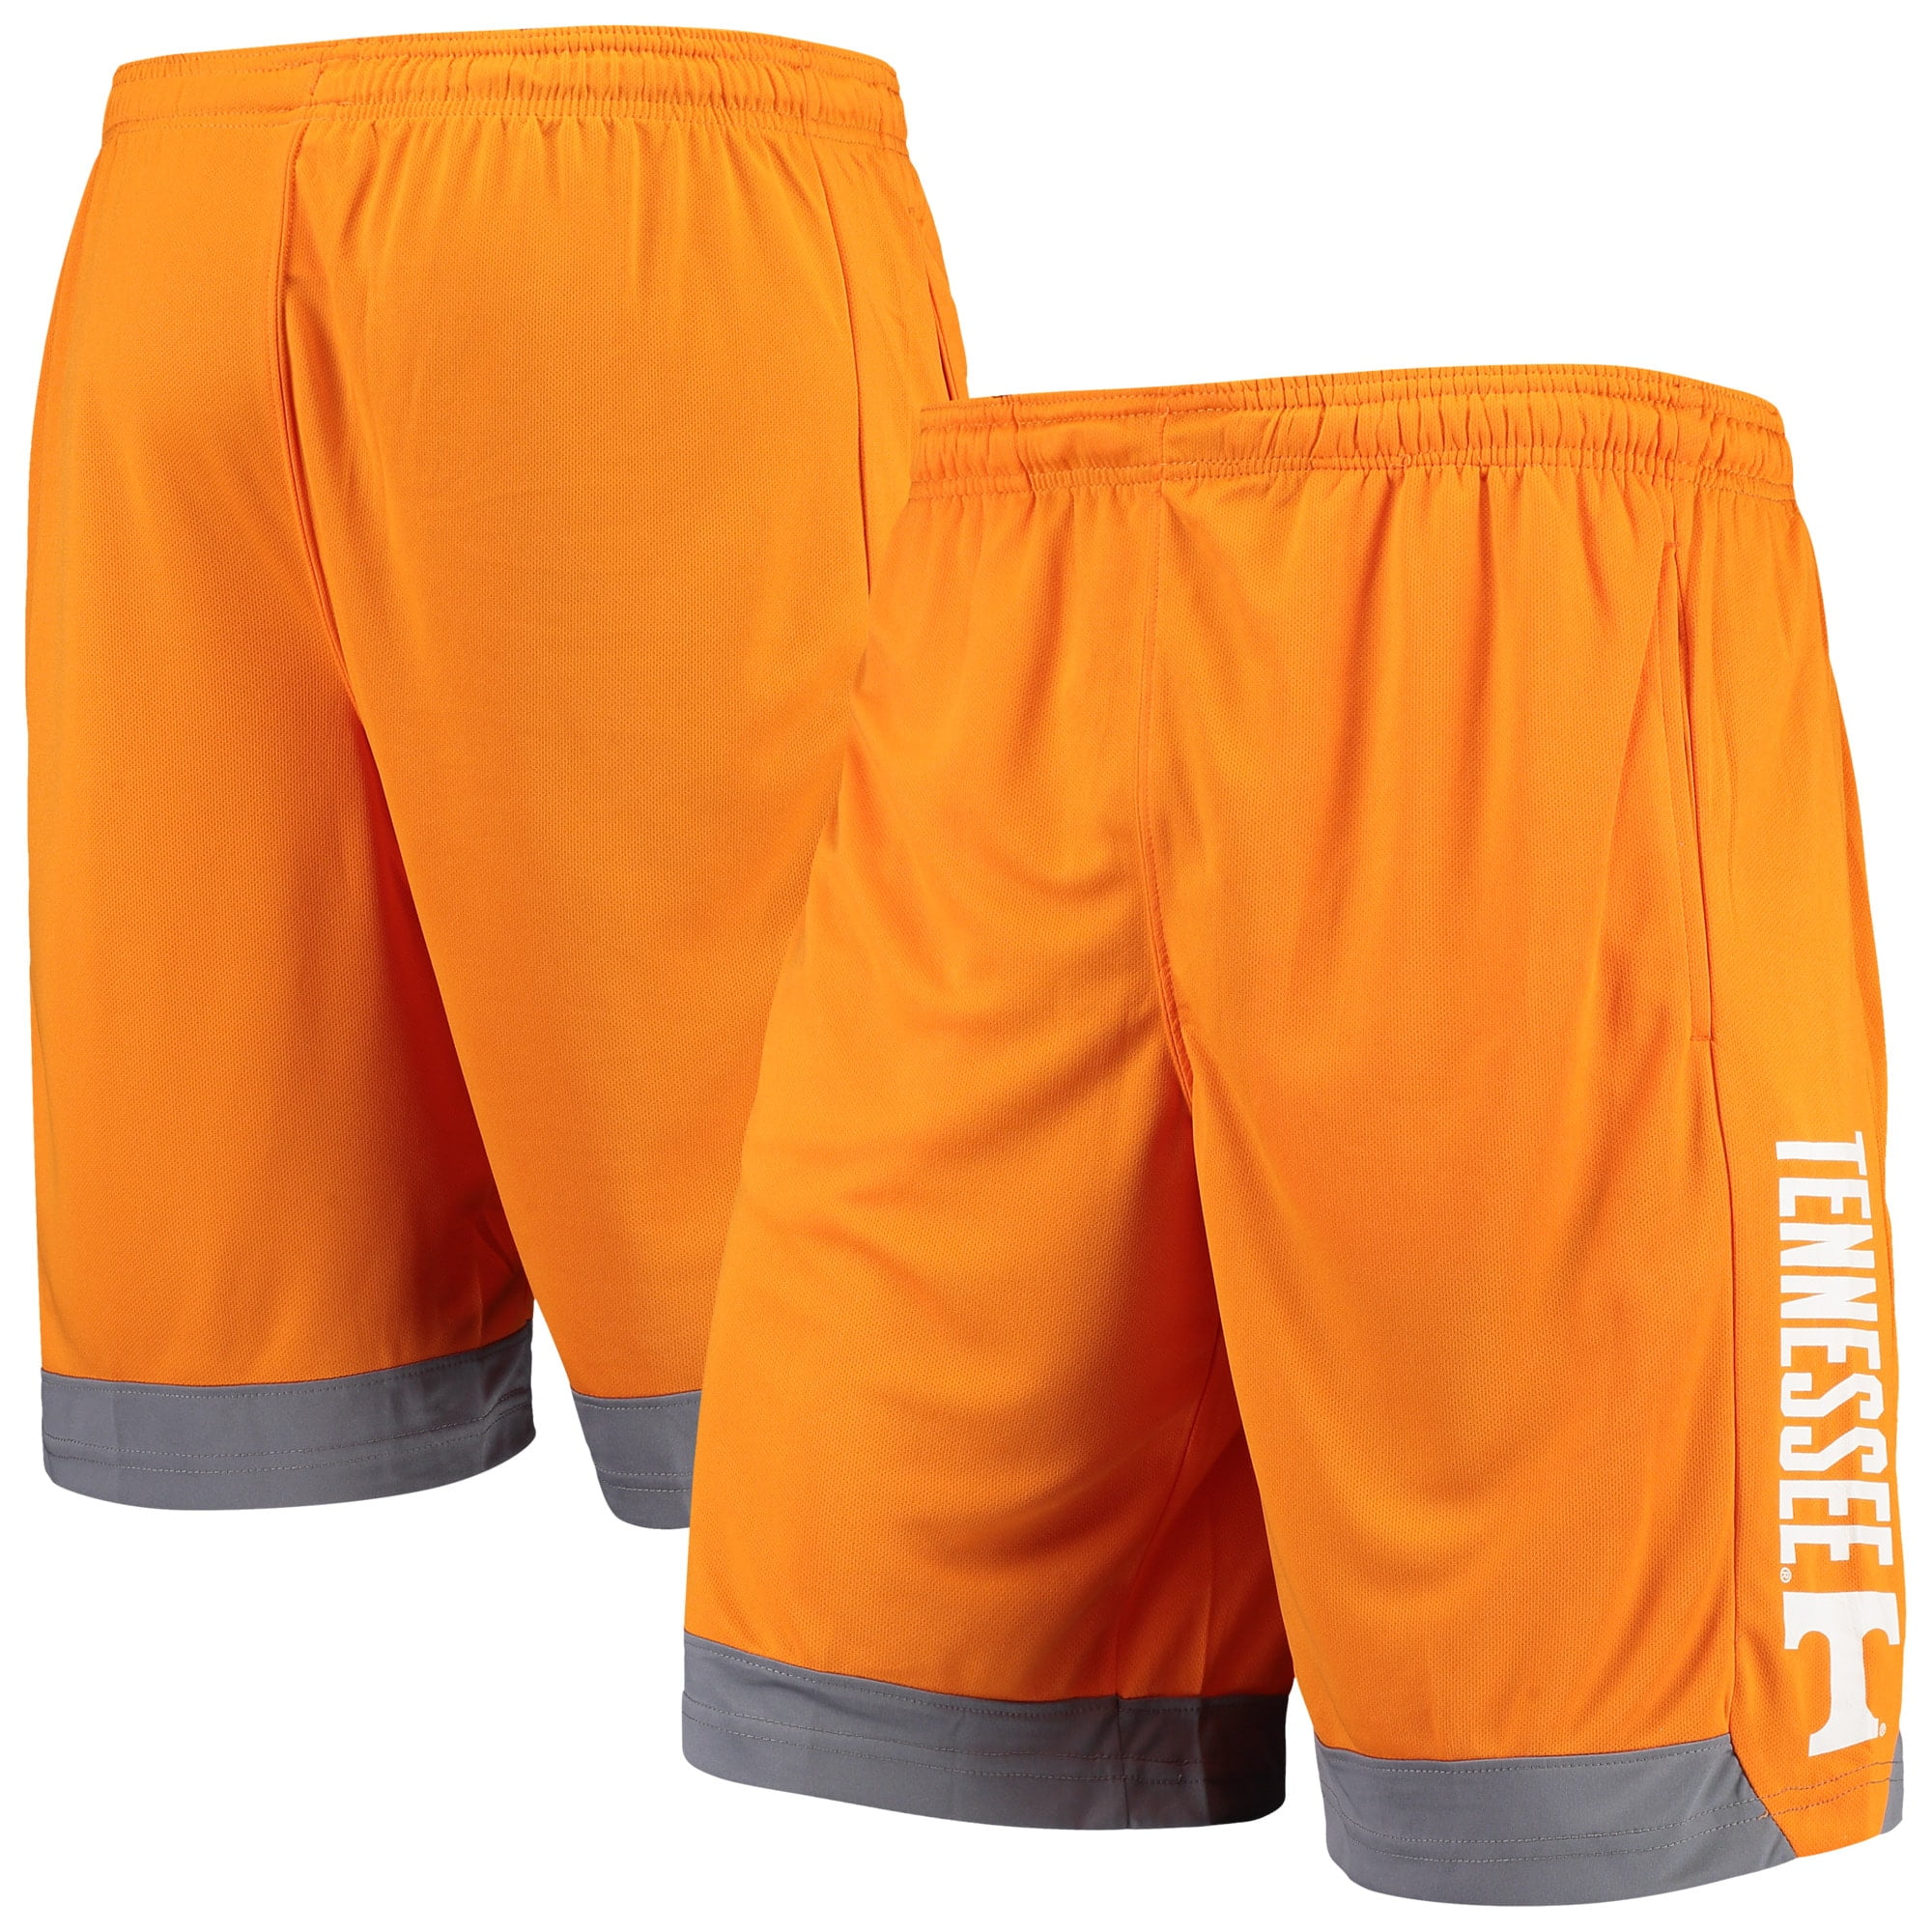 6 Day Orange Workout Shorts for Build Muscle